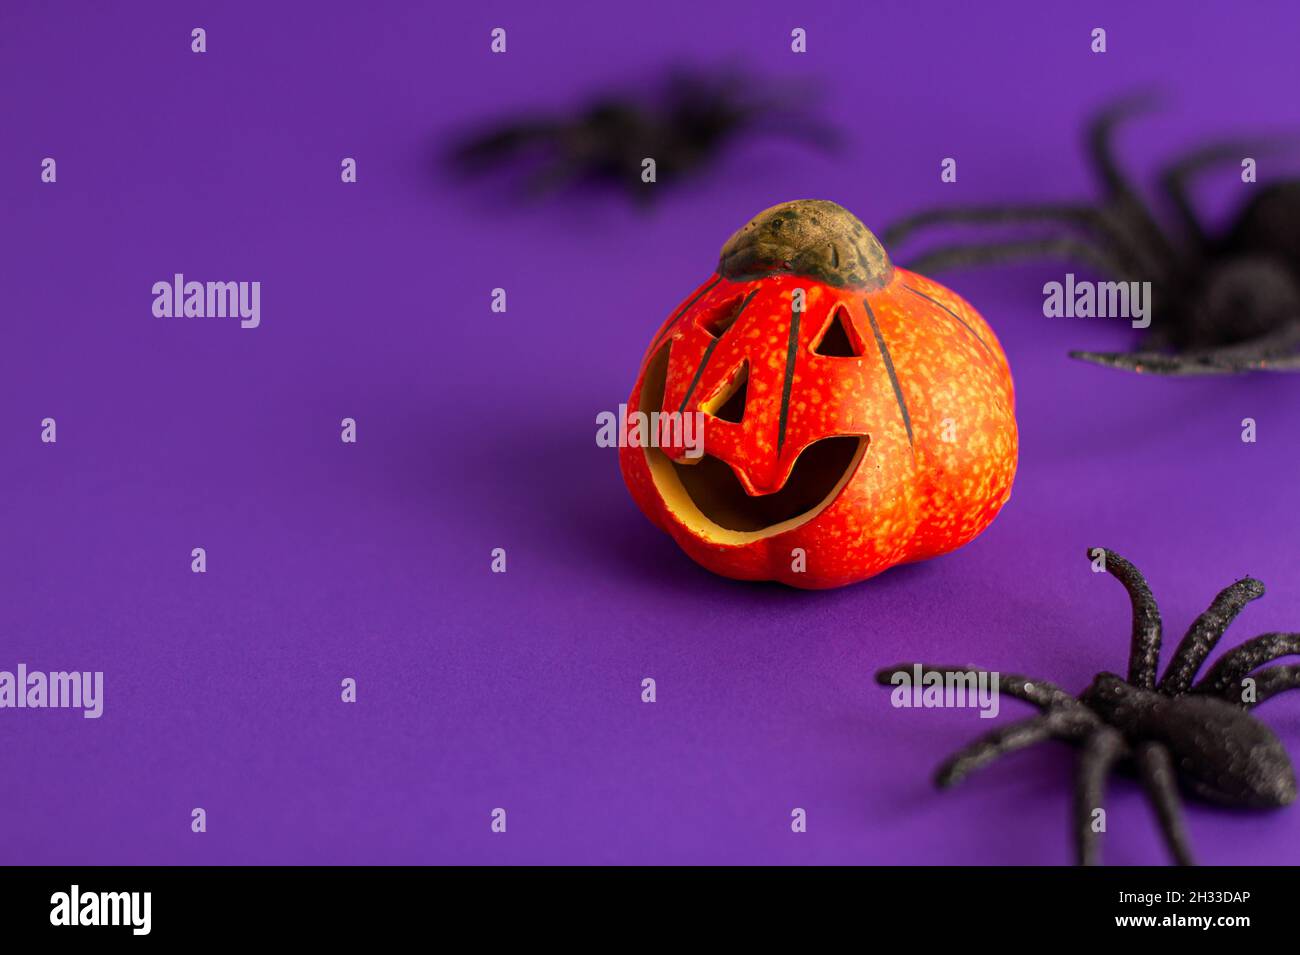 Close up of decoration orange small smile Halloween pumpkin and black horror spiders on vibrant purple blurred background and copy space. Holiday autu Stock Photo